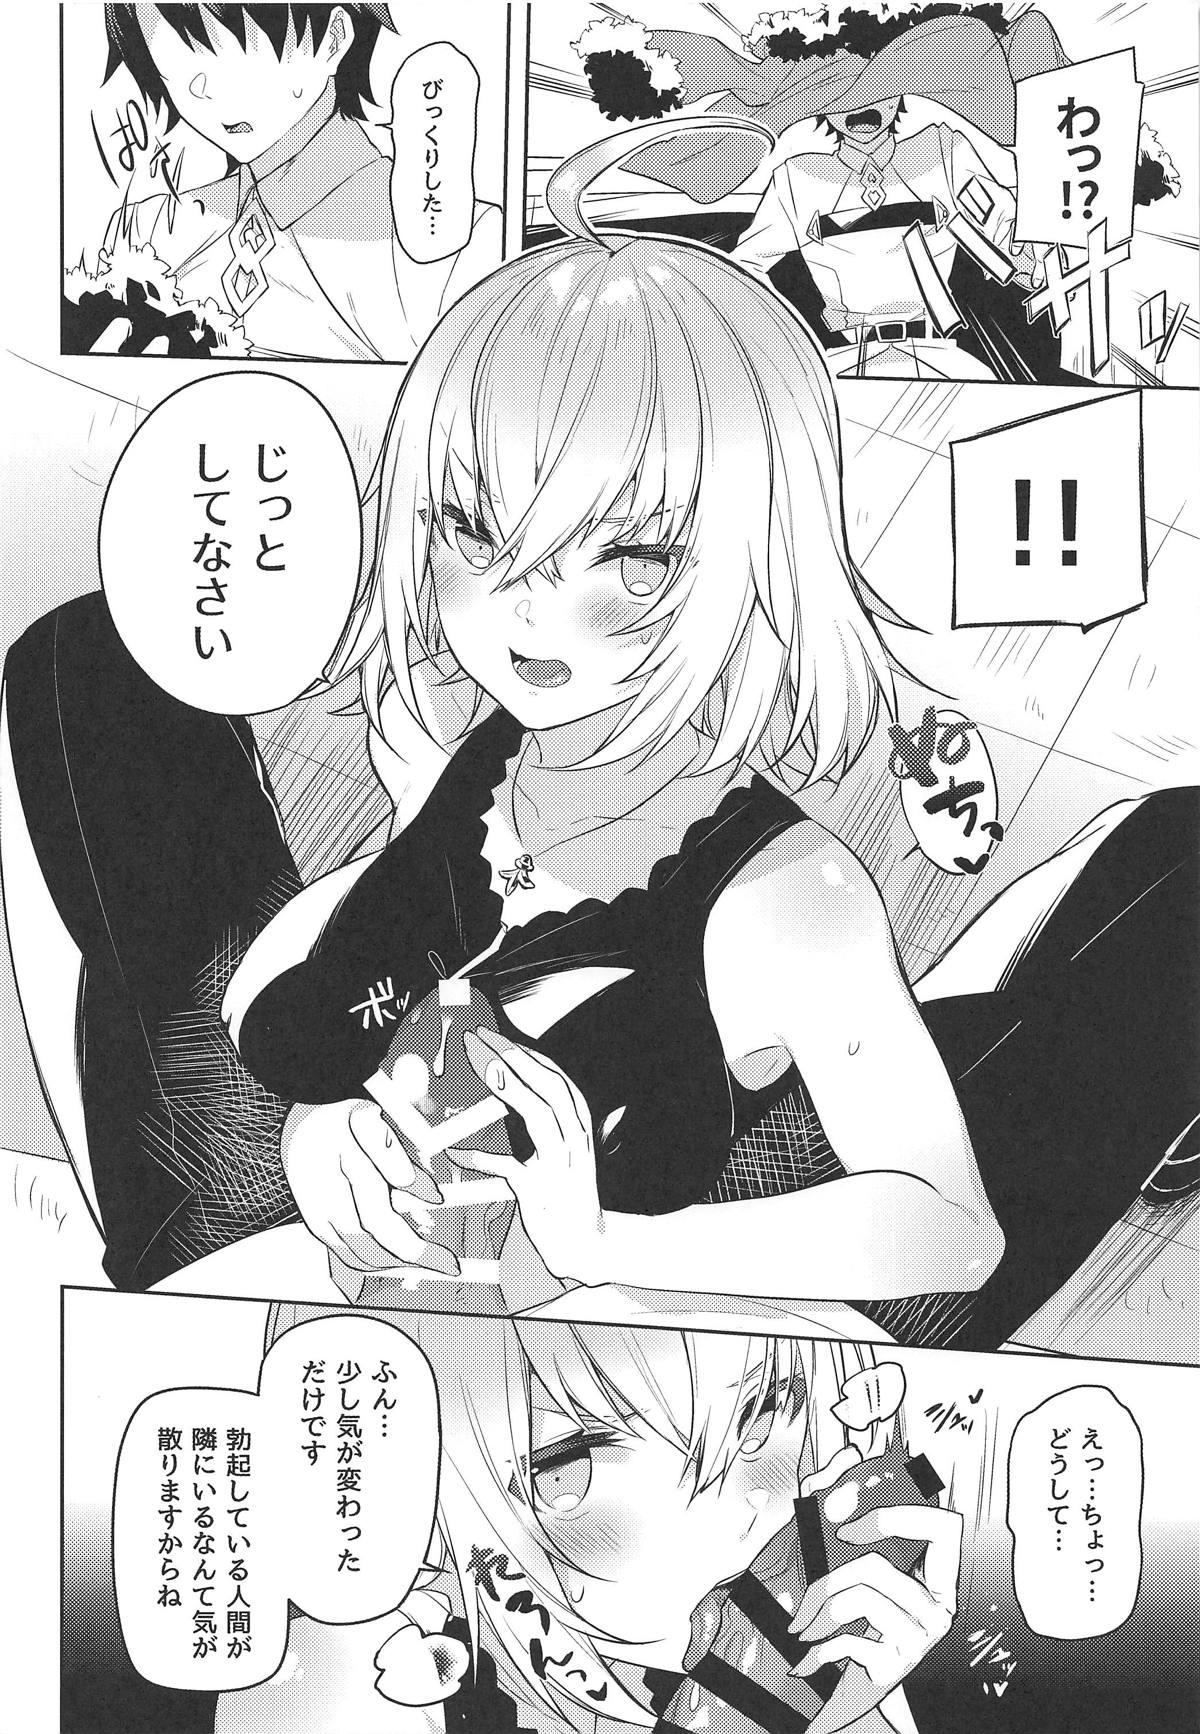 Abuse Shinjuku Sneaking Mission - Fate grand order Hidden Cam - Page 5